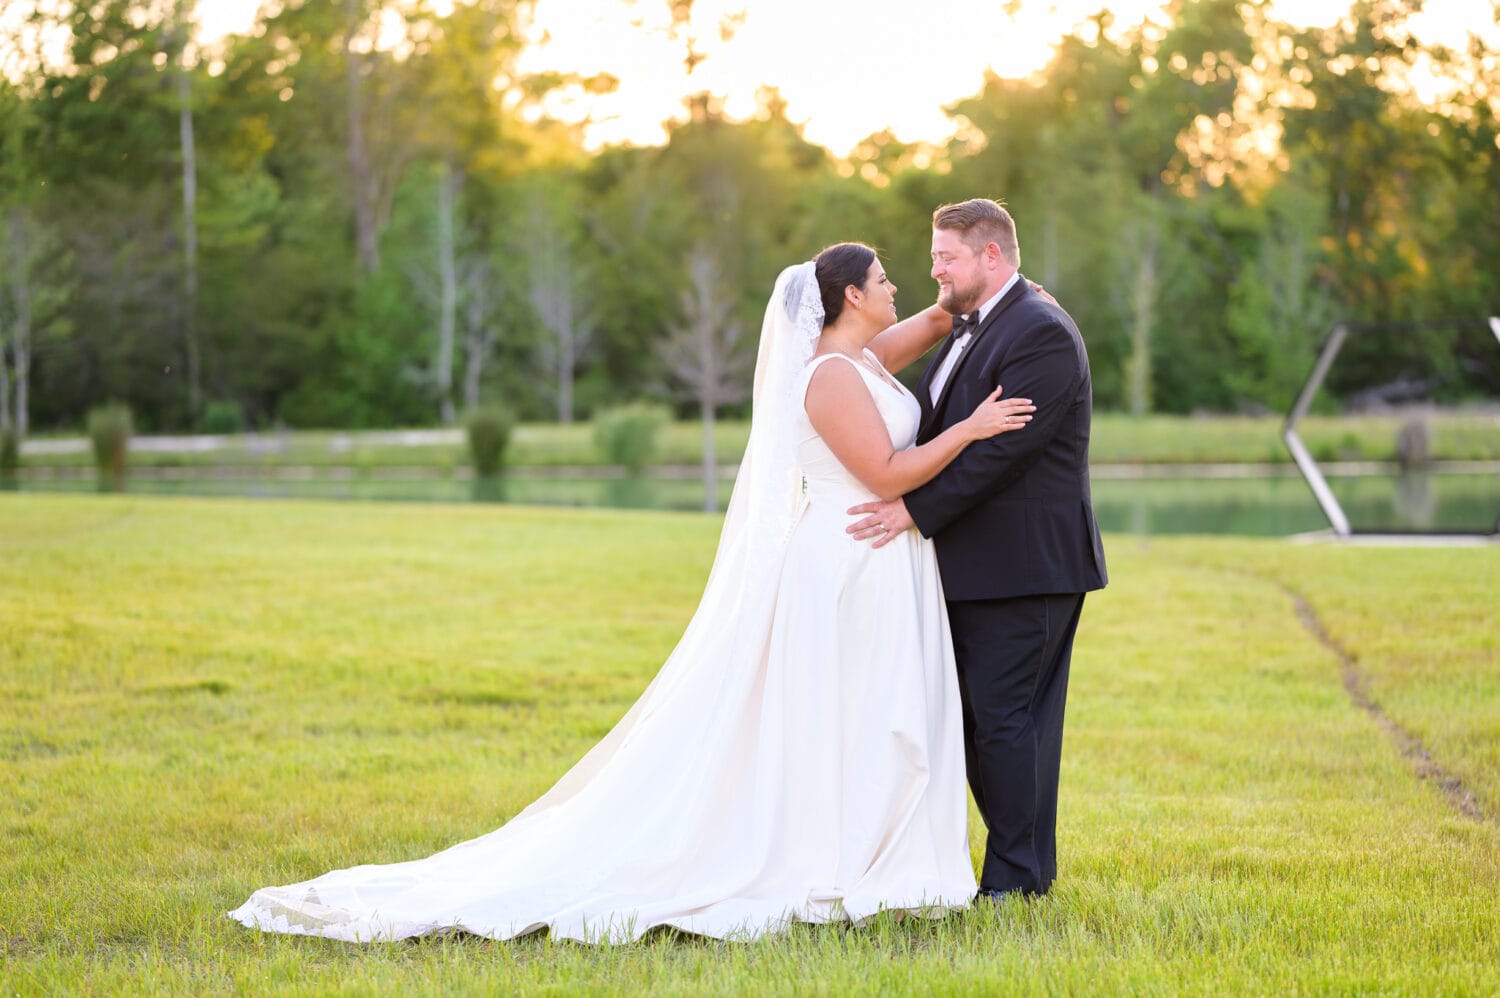 Portraits of bride and groom in the sunset by the lake - The Venue at White Oaks Farm